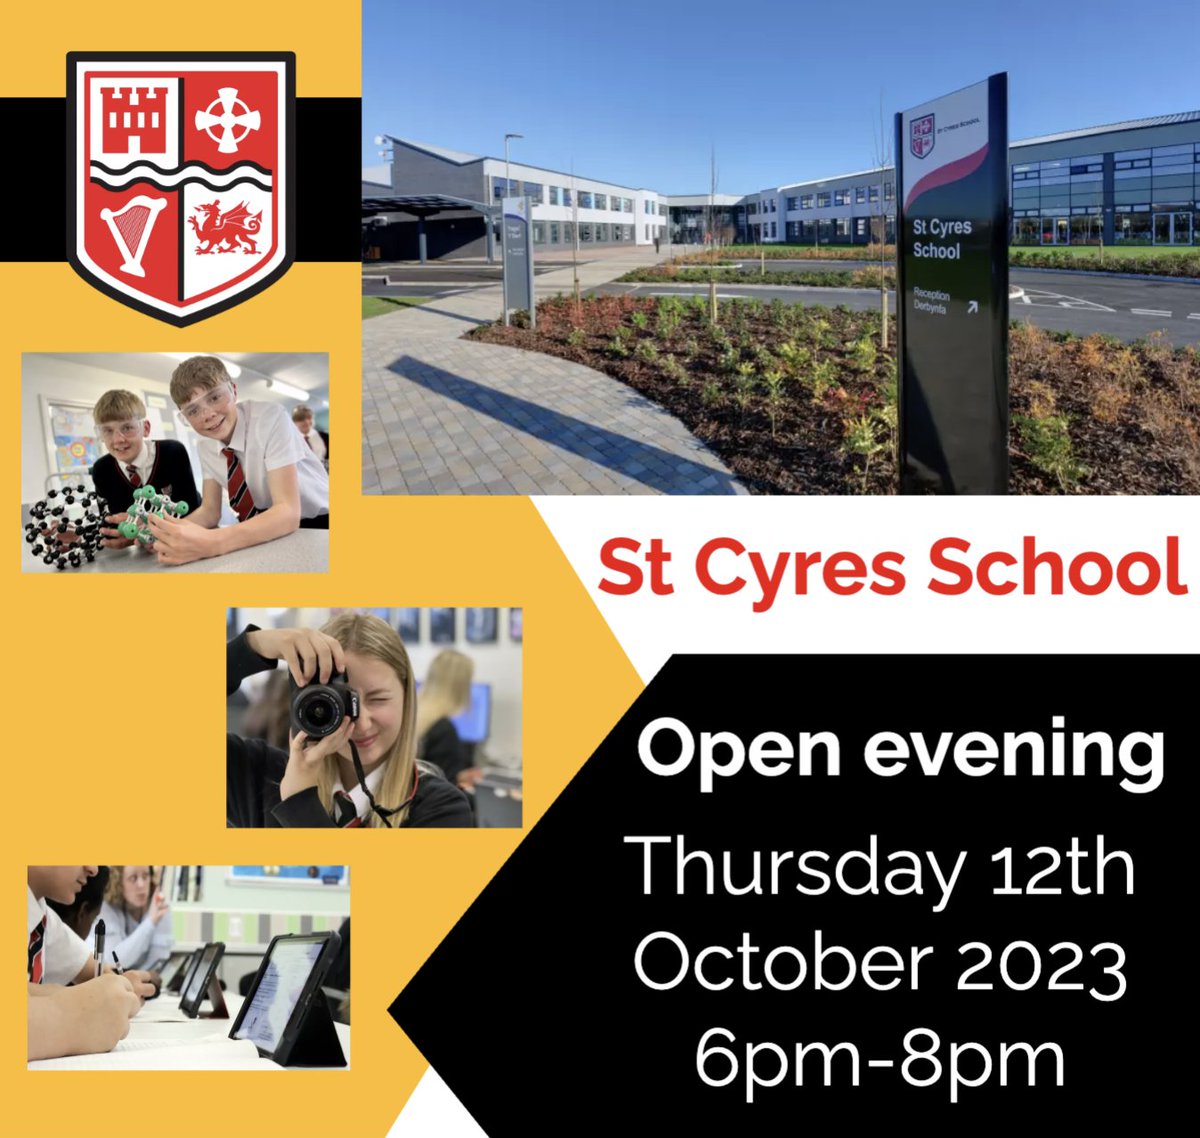 We would like to invite you all to our Open evening, please share @CoganPrimary @DinasPowysPS @YsgolFairfield @standrewsmajor @LlandoughSchool @GPSCardiff @MSPSCardiff @GwenfoCWPrimary @SullyPS @StCyresSchool @CyresTransition